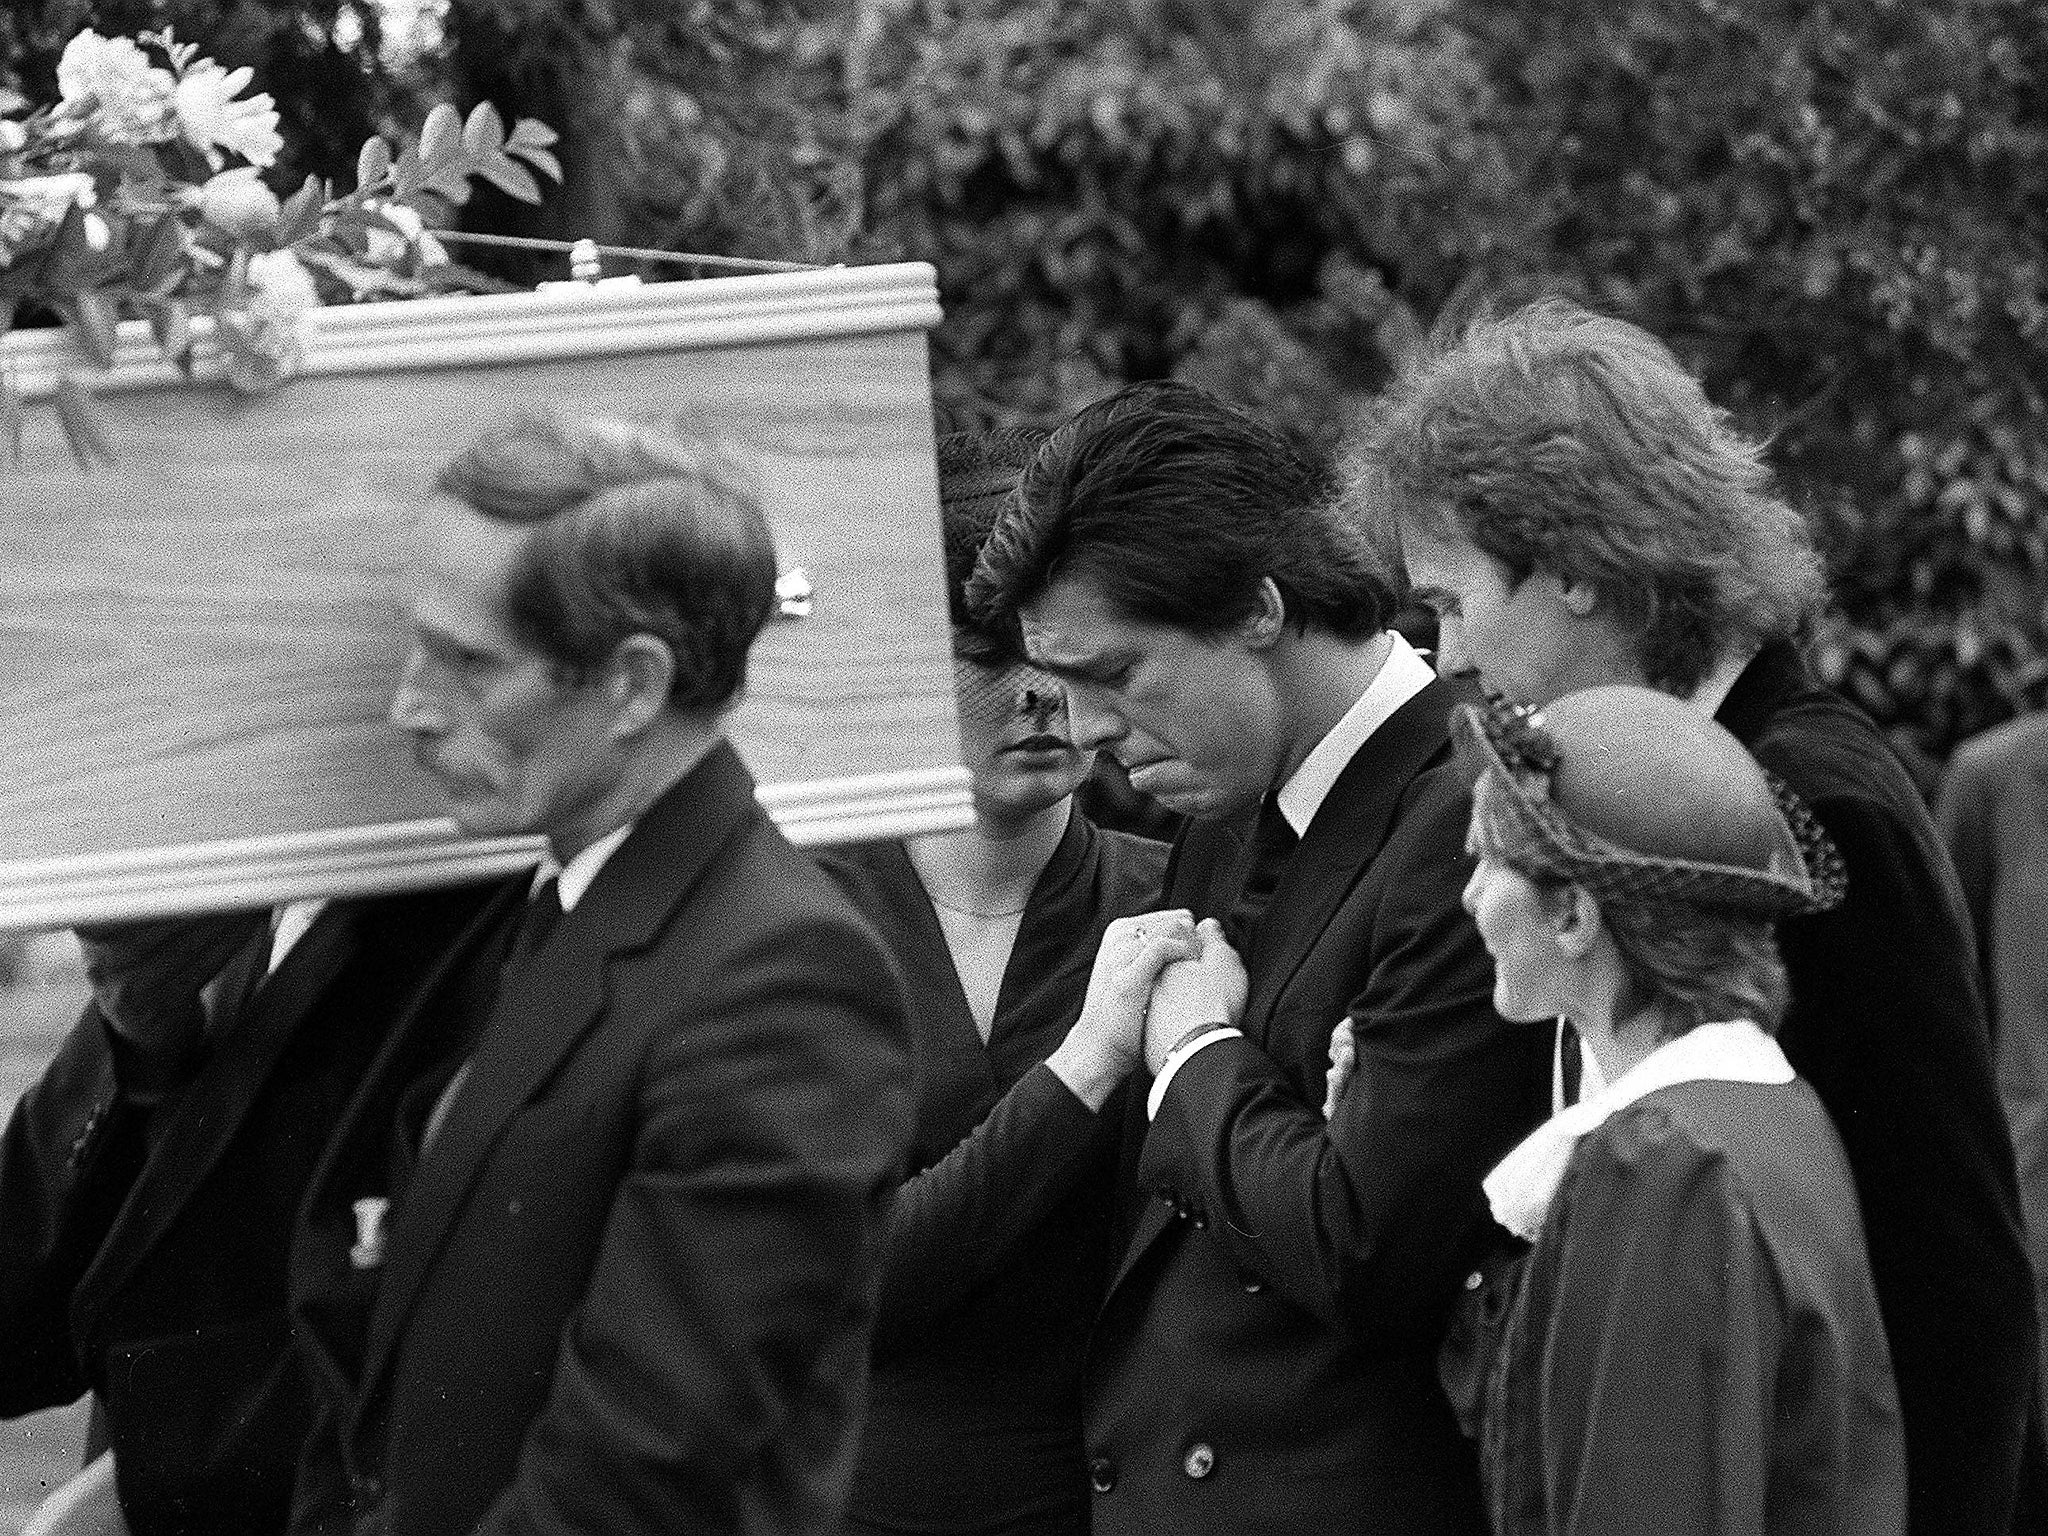 Jeremy Bamber (centre) appears grief-stricken at the funeral in 1985 of his adoptive parents, Nevill and June, and sister Sheila. He was later convicted of the murder of all three, as well as that of Sheila’s six-year-old twin sons